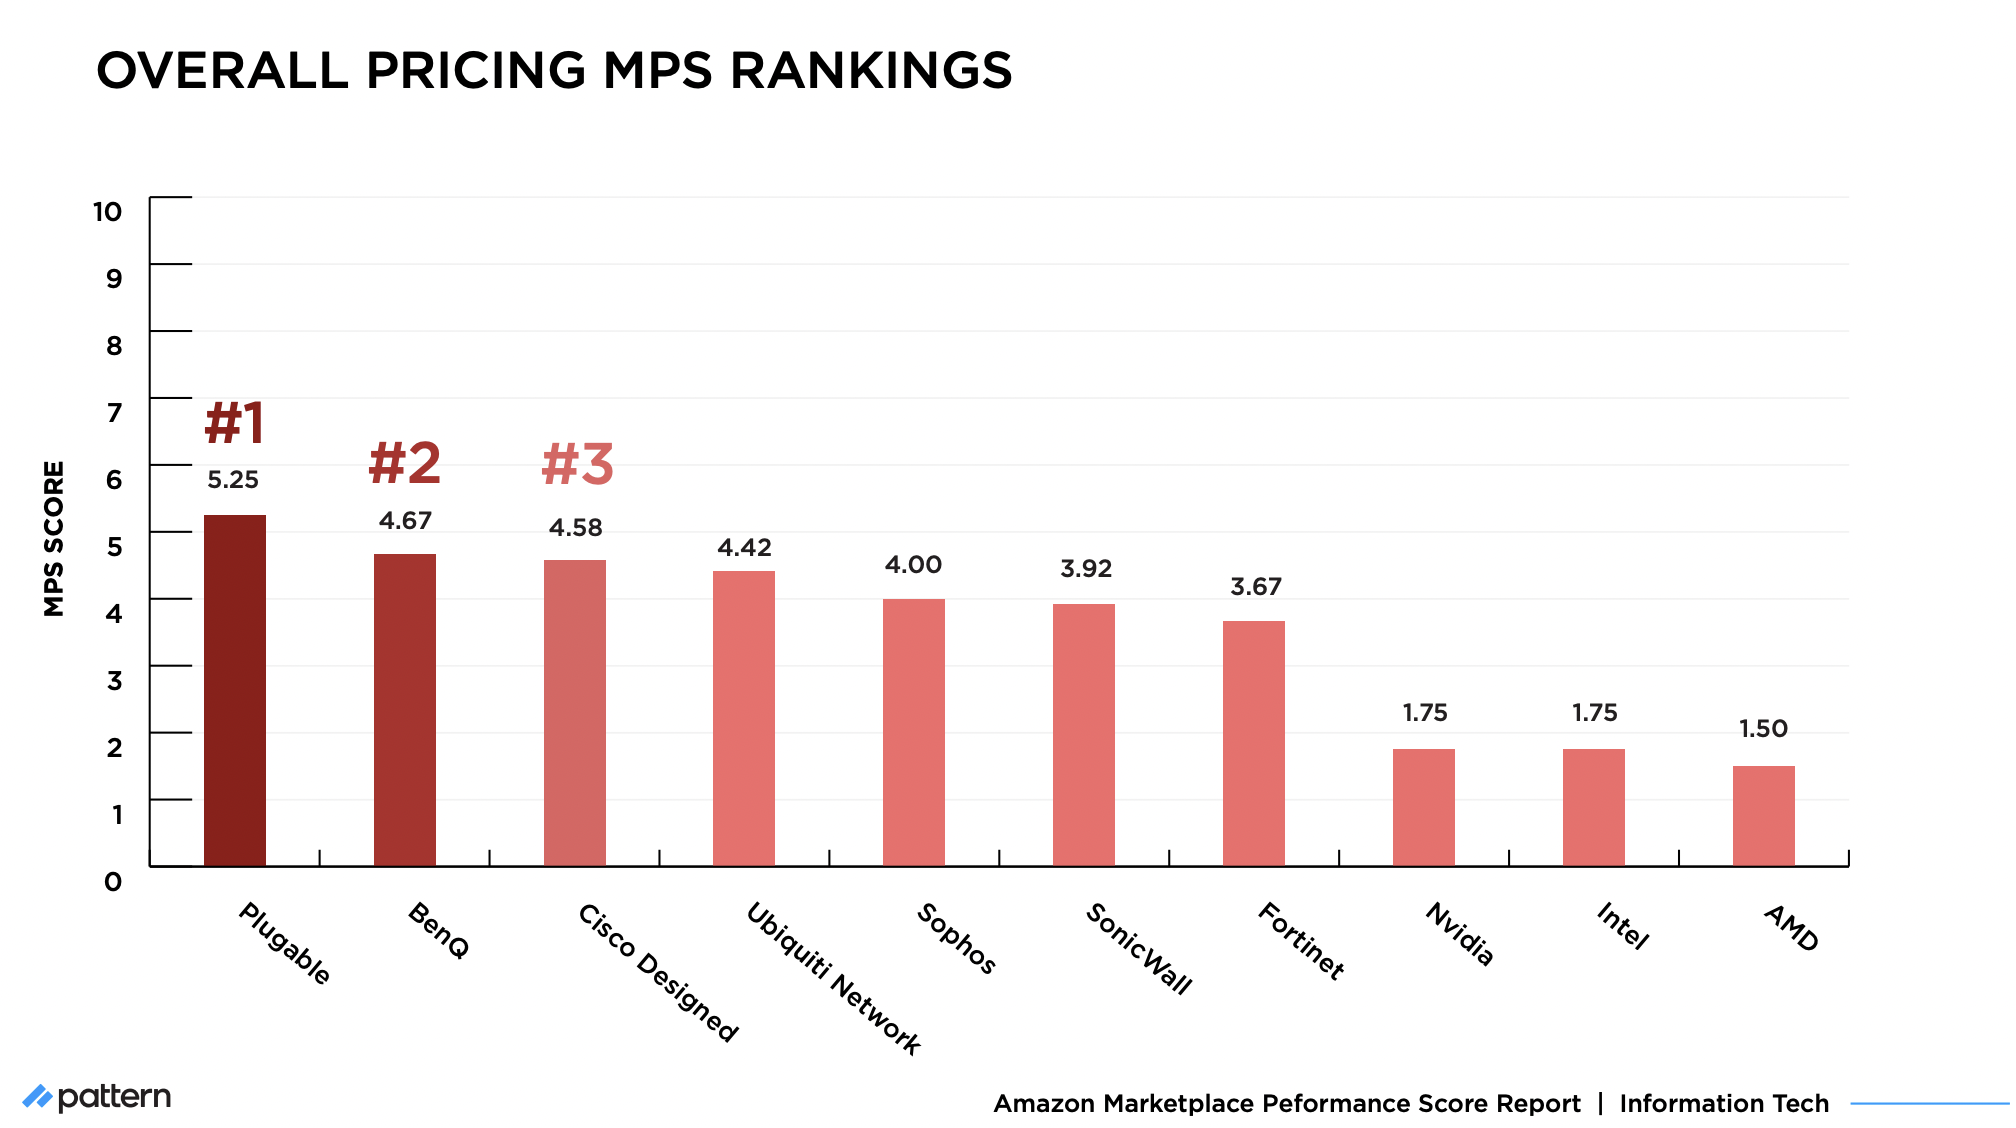 Marketplace Performance Score: Updated Information Tech Overall Pricing Rankings